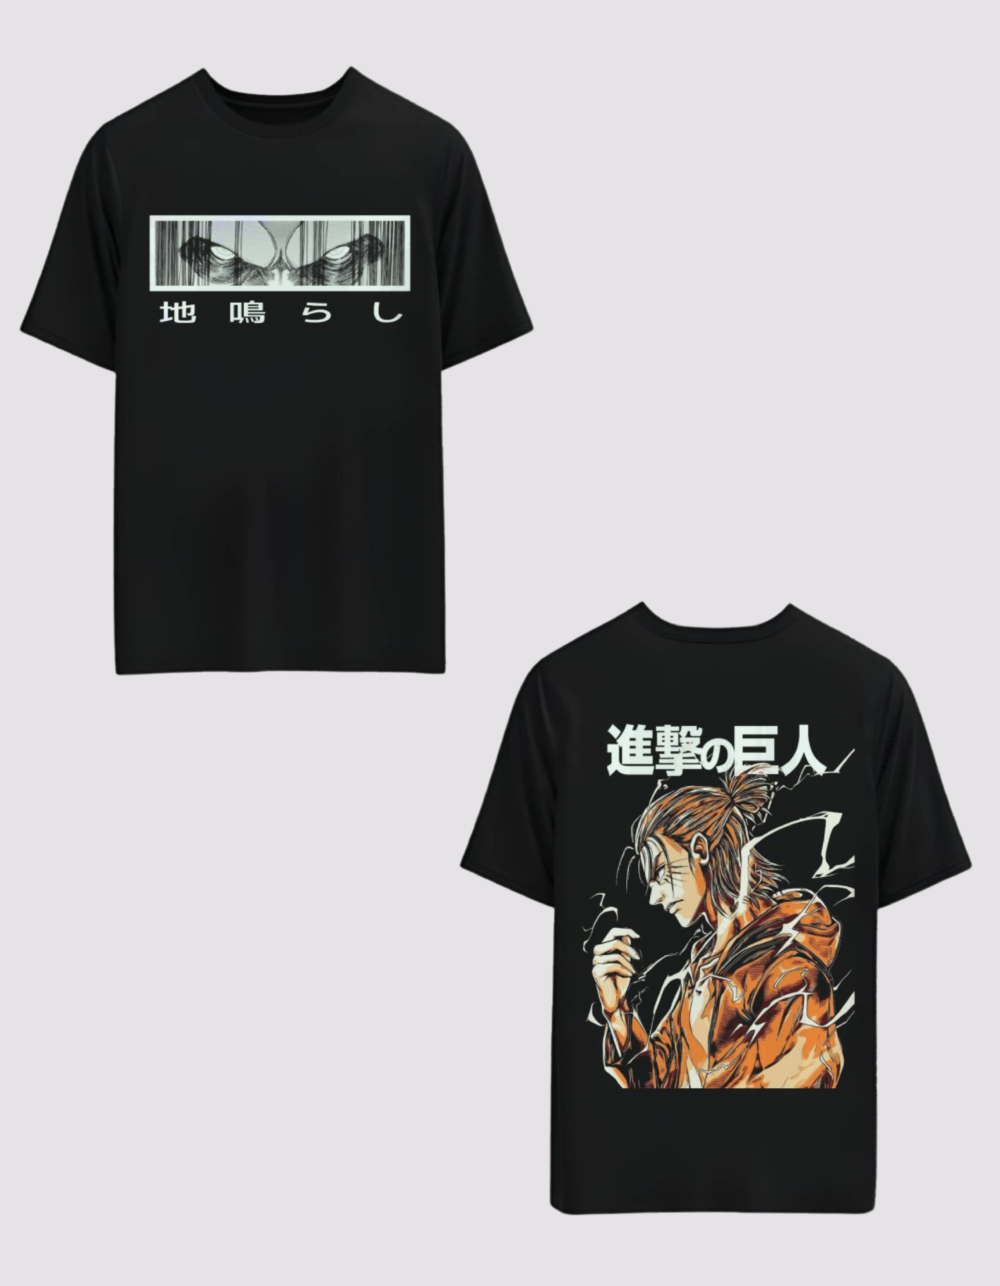 Eren Yeager - Attack on Titan Dual Print Oversized T-shirt